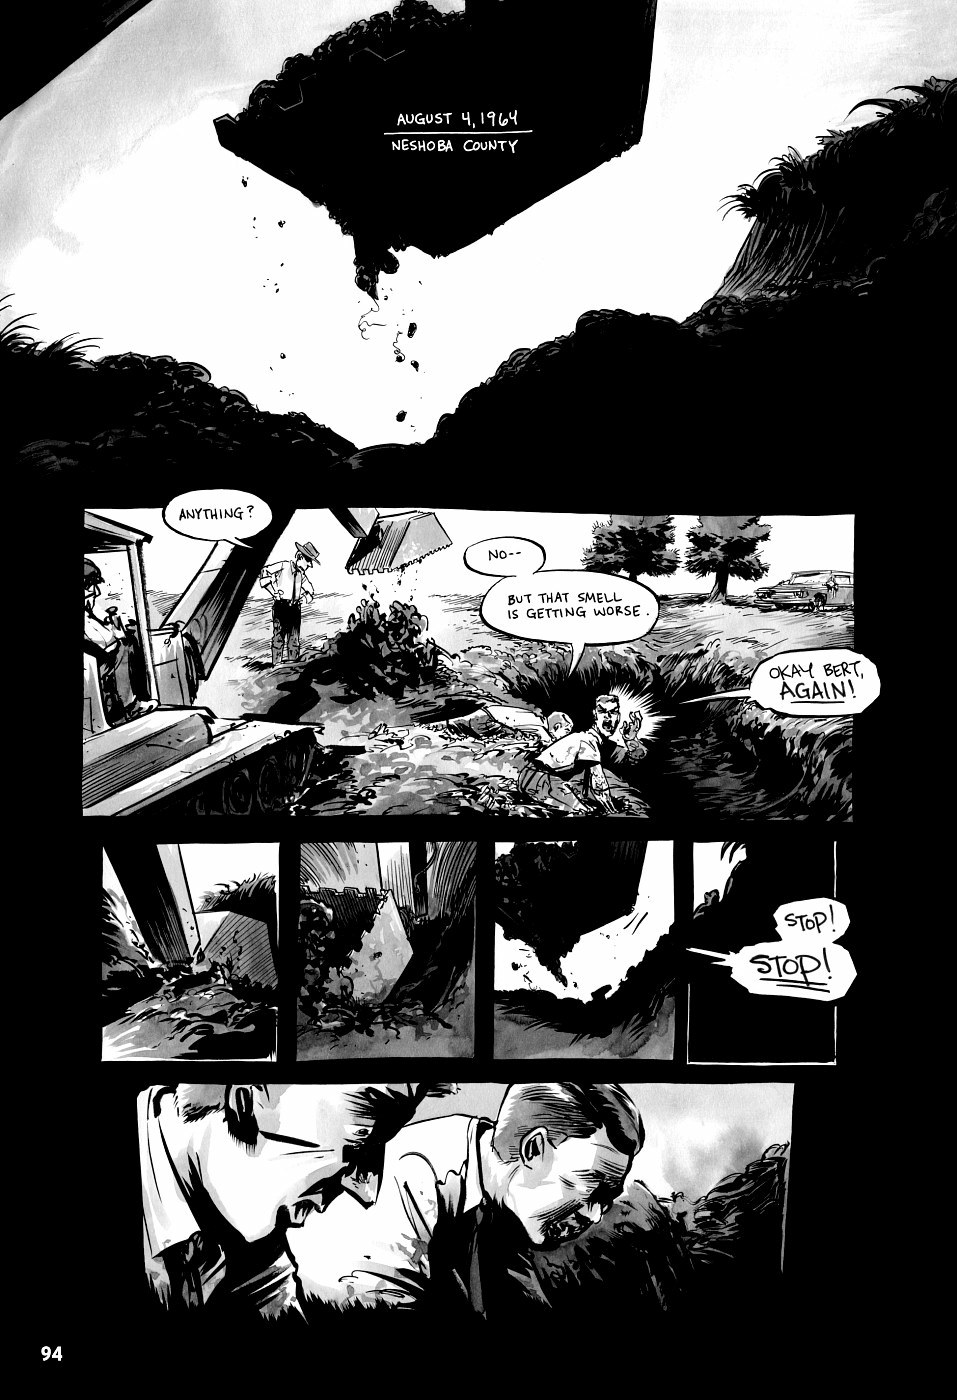 page 94 of march book three graphic novel